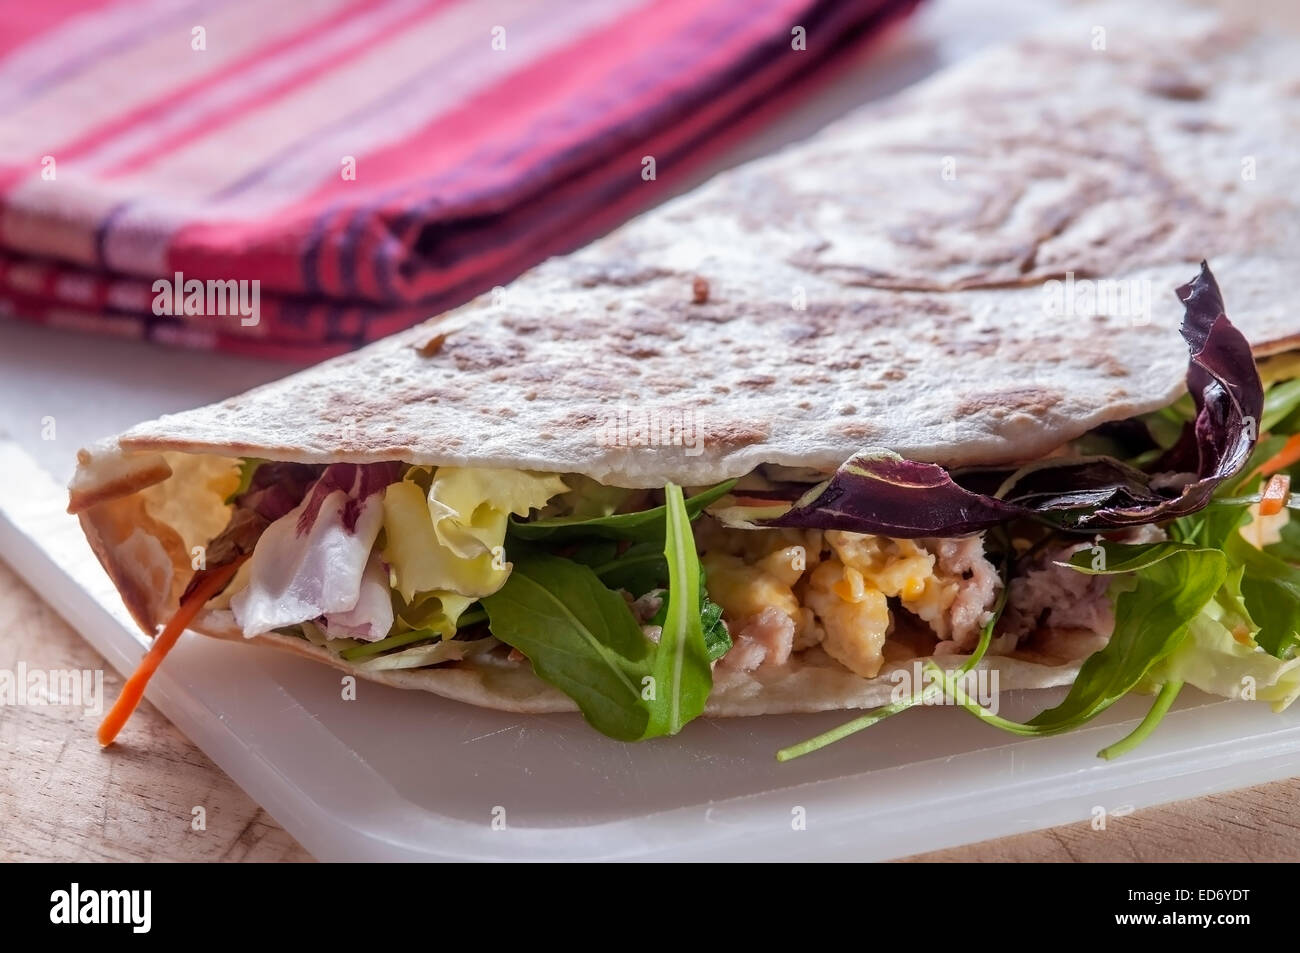 flatbread with tuna eggs and lettuce typical Italian food in northern Italy Stock Photo